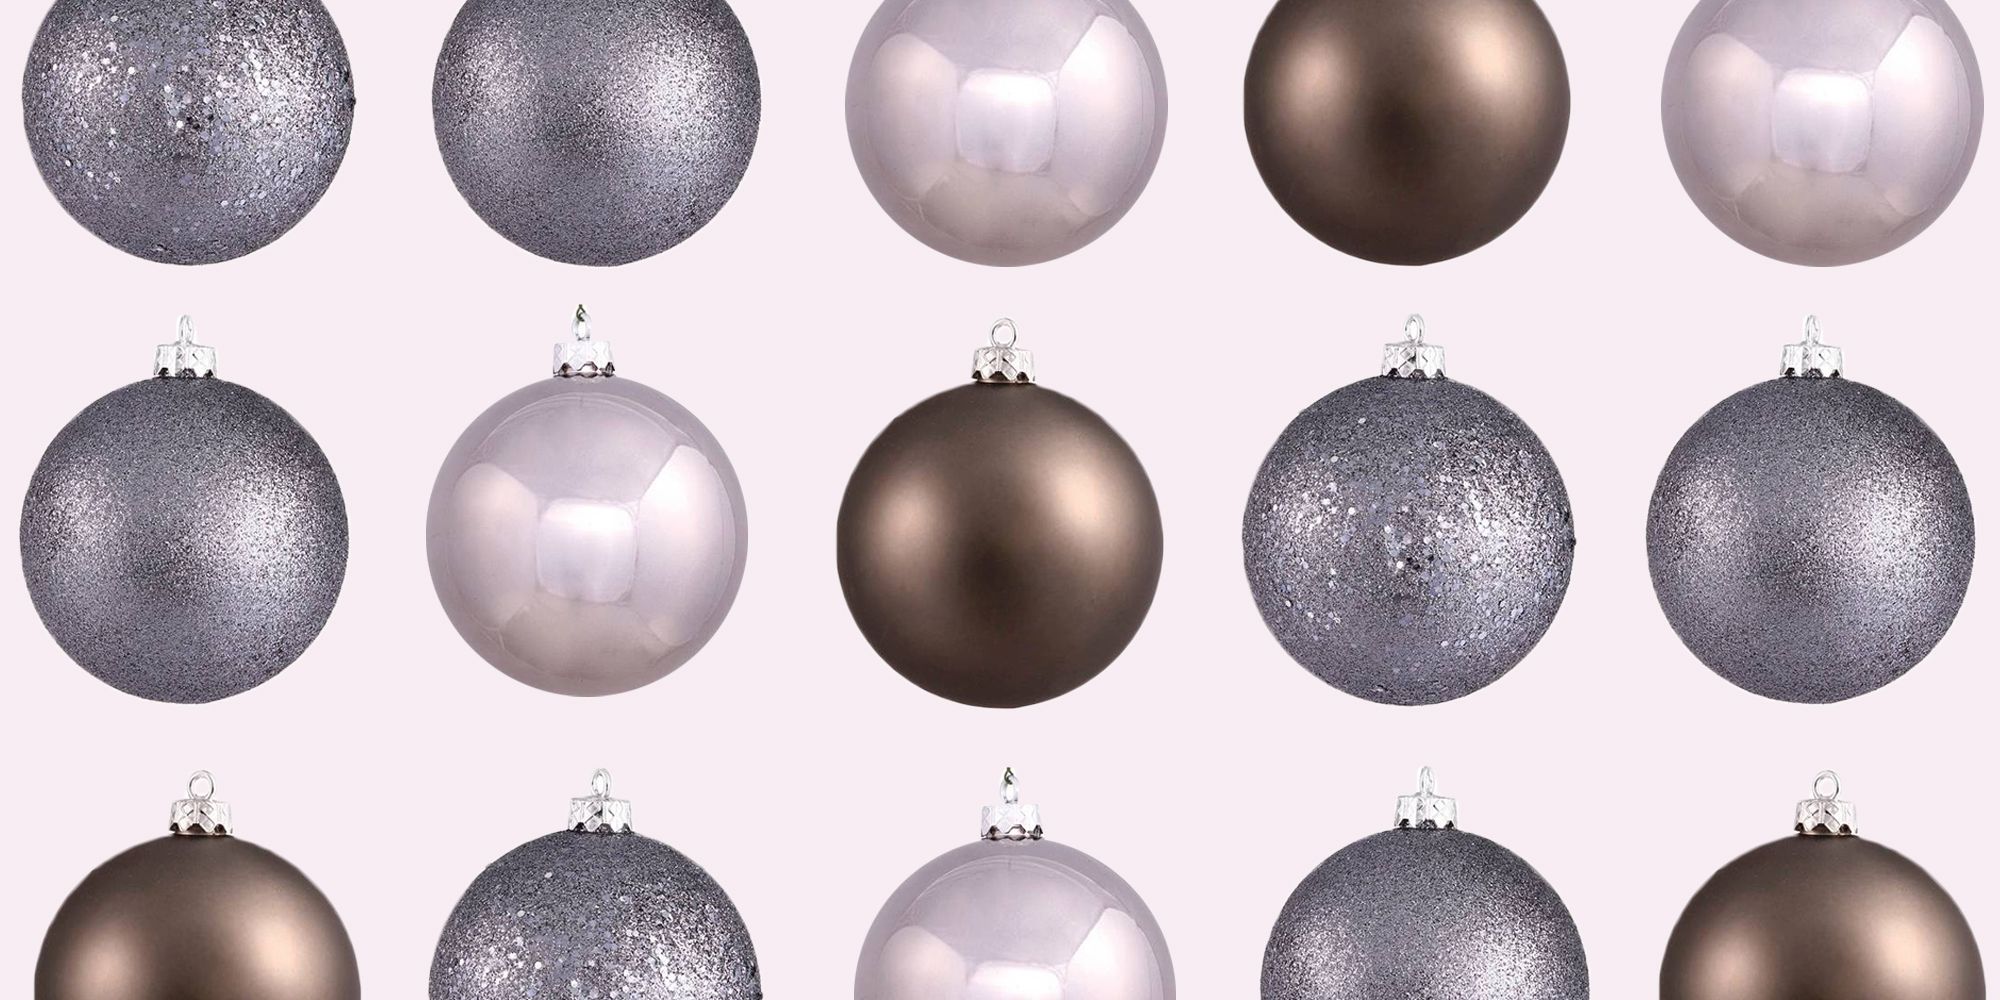 Wironlst 70mm/2.76 Christmas Ball Ornaments Shatterproof Clear Large Plastic Hanging Ball Decorative Baubles Set with Stuffed Delicate Decorations 24 Counts, Silver